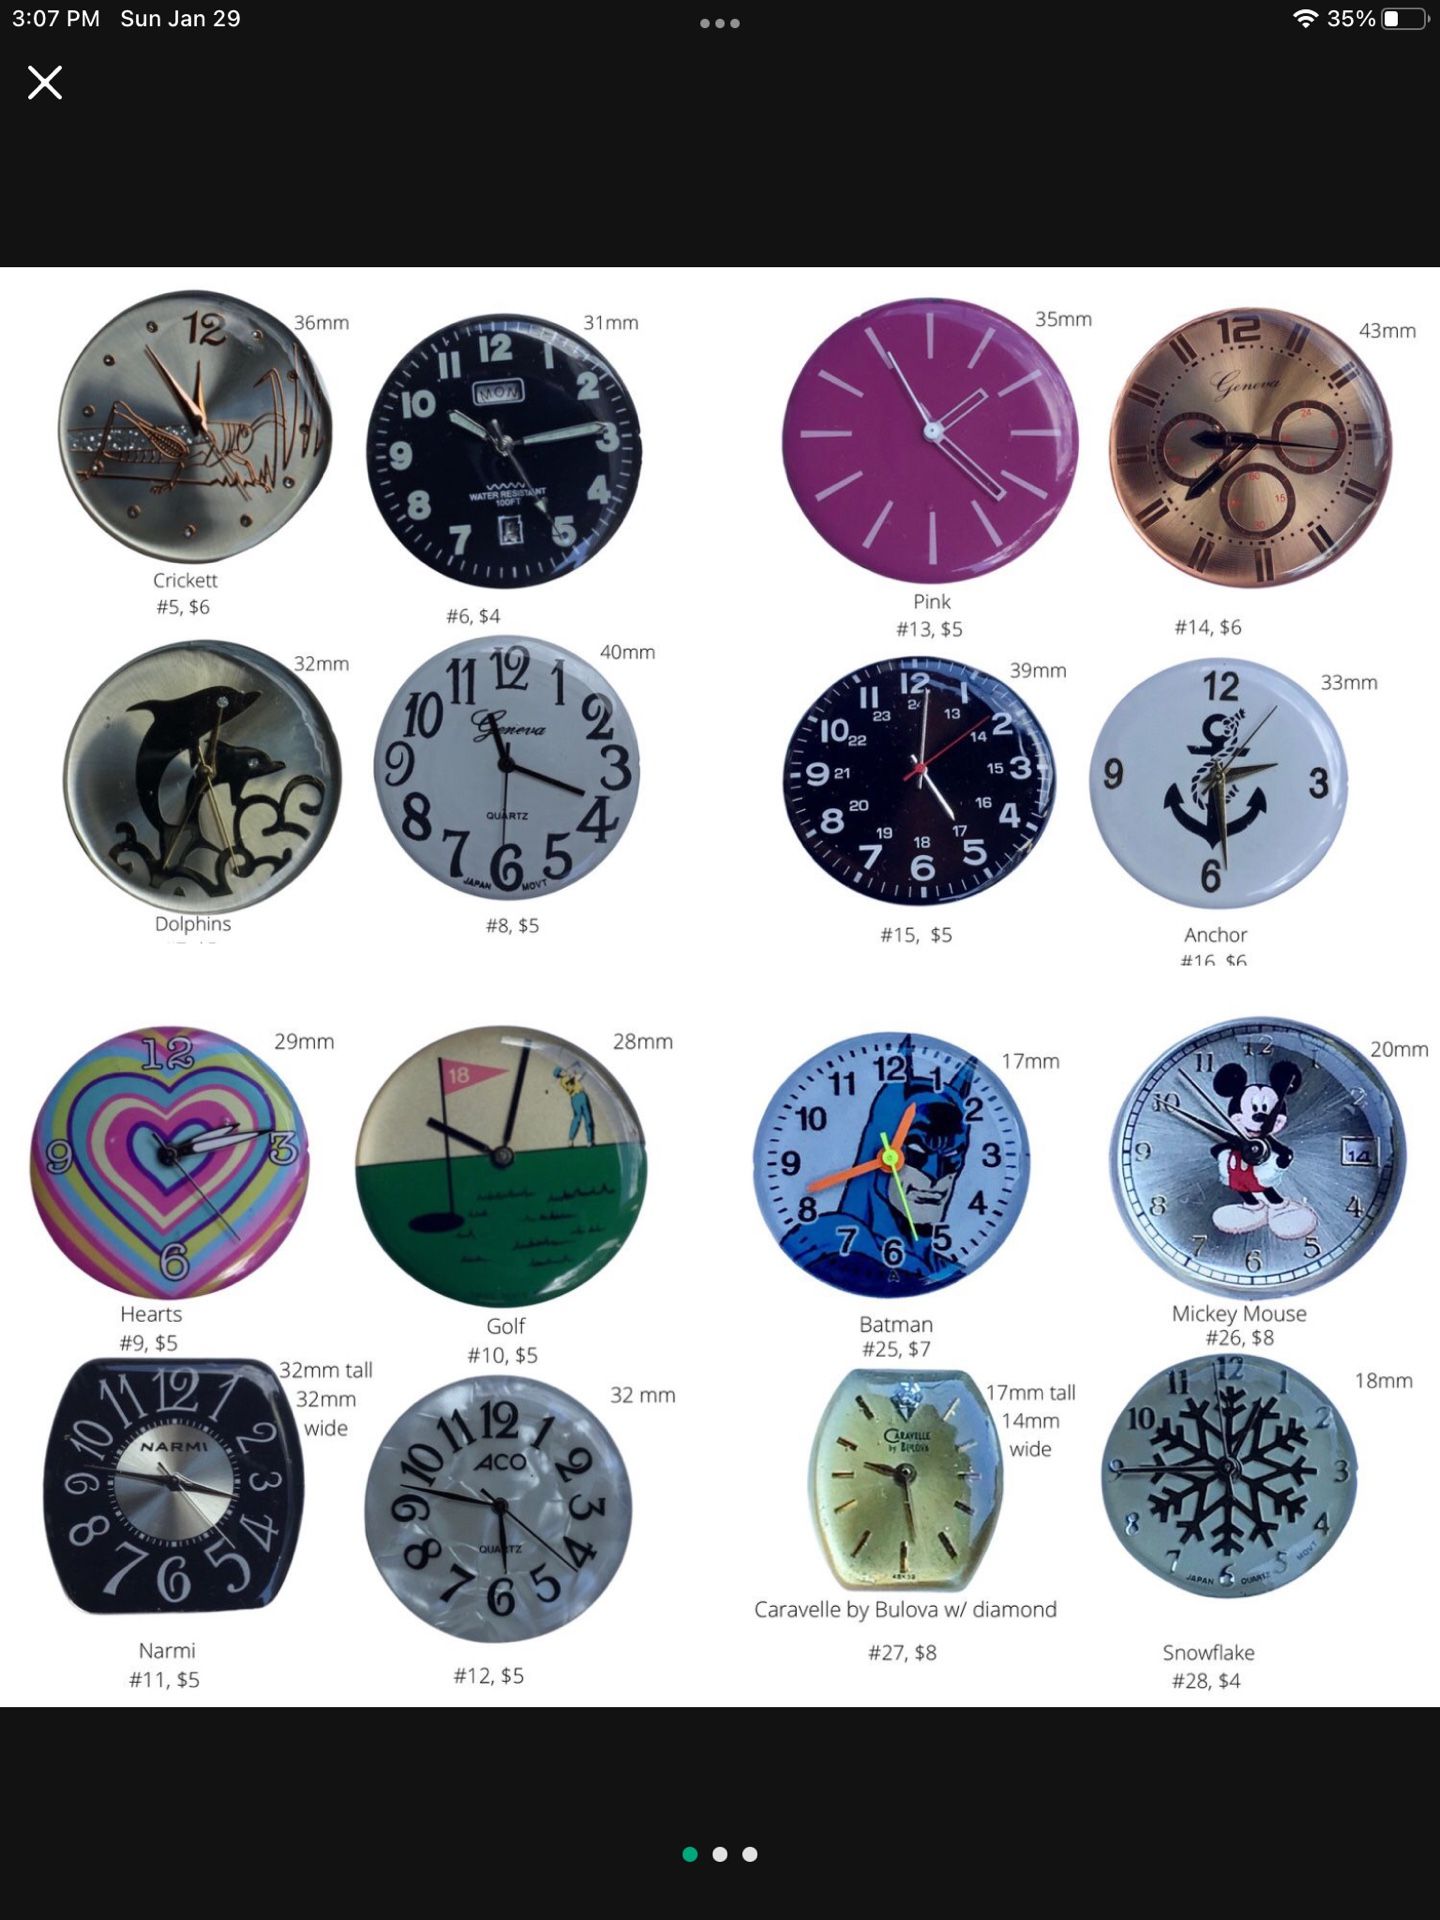 Actual Watch Faces sealed for jewelry making and crafts, see pics for prices